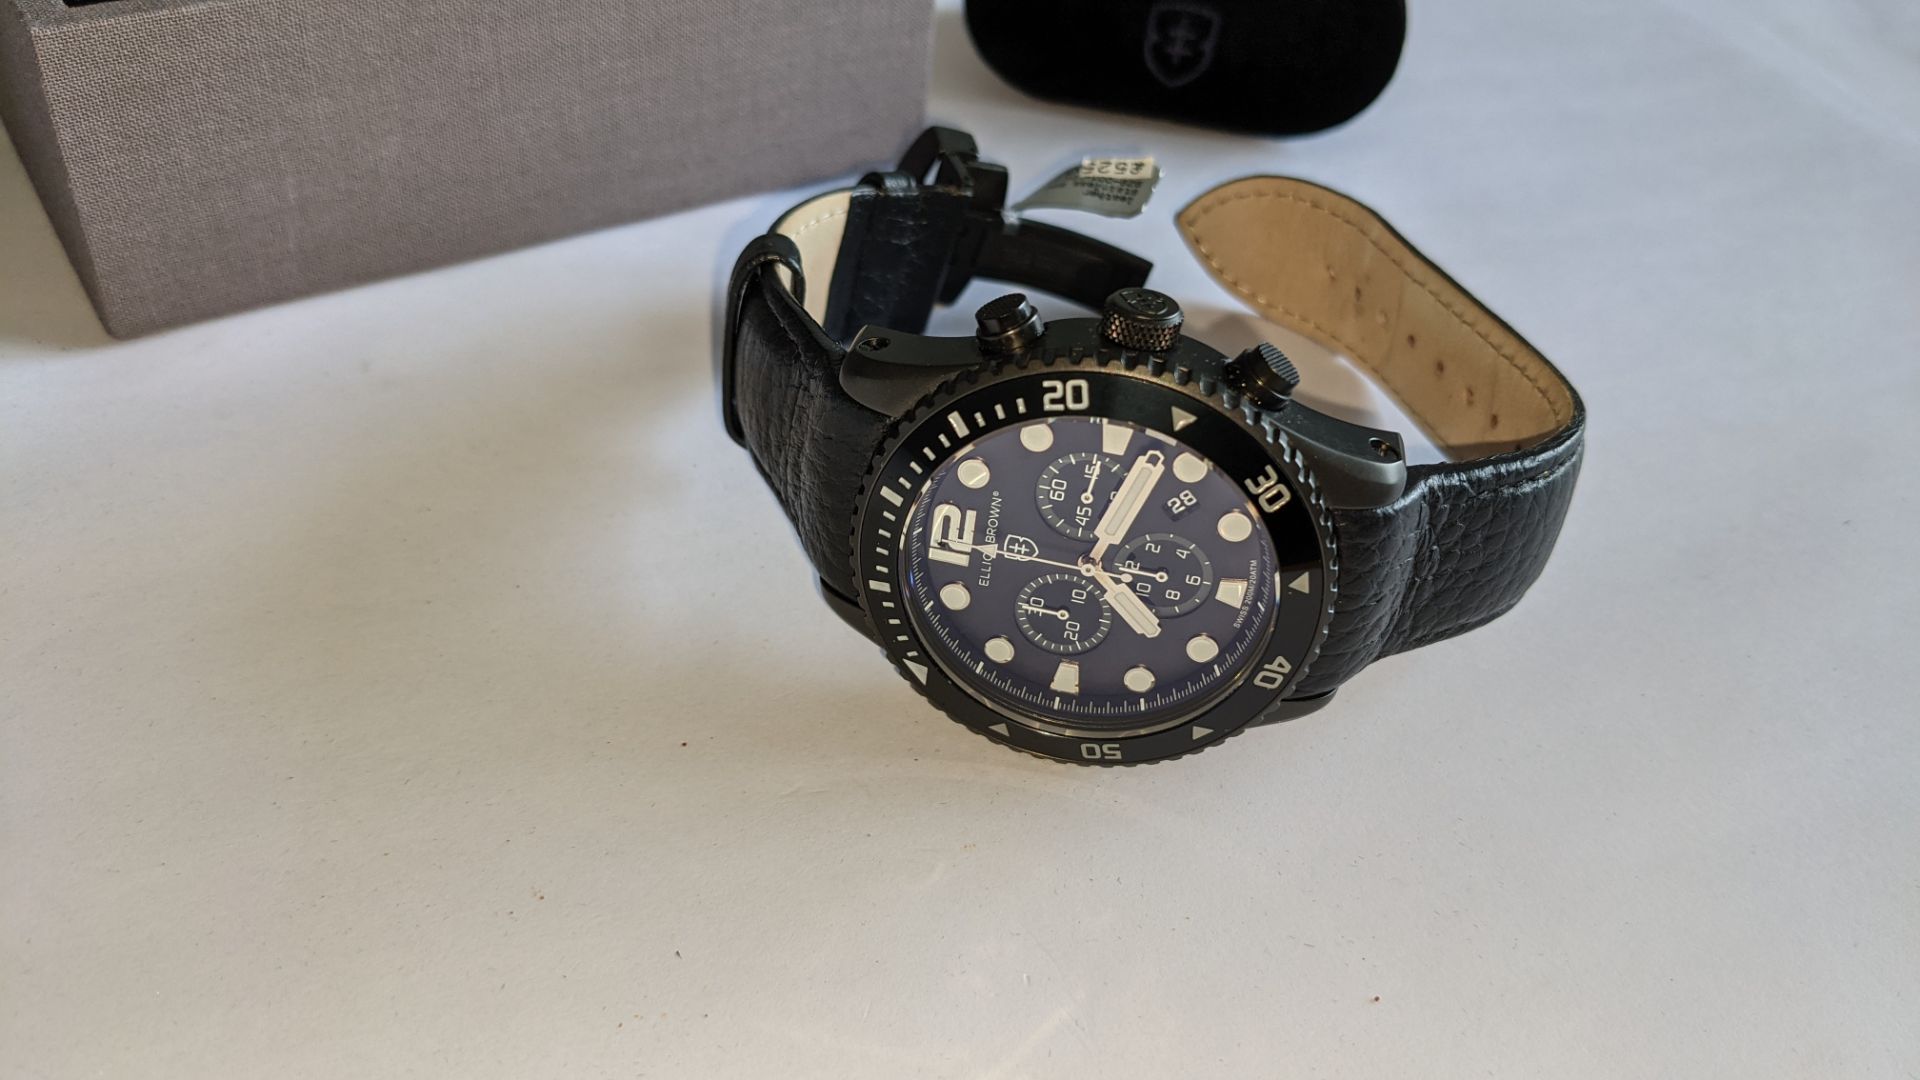 Elliot Brown The Bloxworth watch on leather strap, product code 929-001-L01. Stainless steel, 200M w - Image 7 of 15